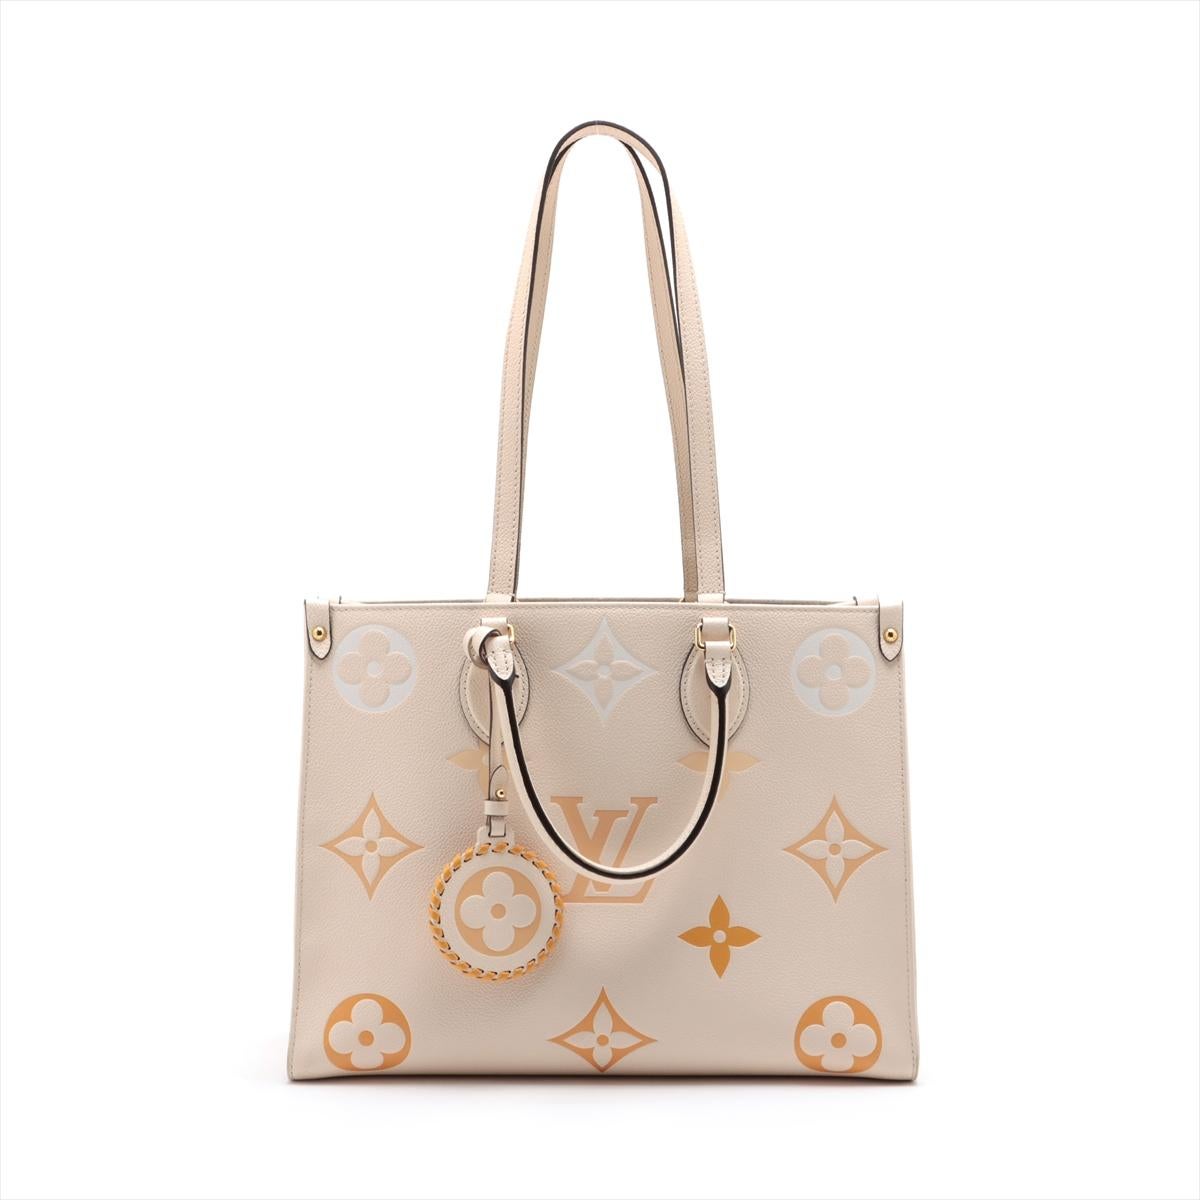 The Louis Vuitton Giant Monogram Empreinte By The Pool On the Go MM in Creme is a statement of modern luxury and sophistication. The bag features the iconic Monogram Empreinte leather with an oversized rendition, showcasing a playful and artistic